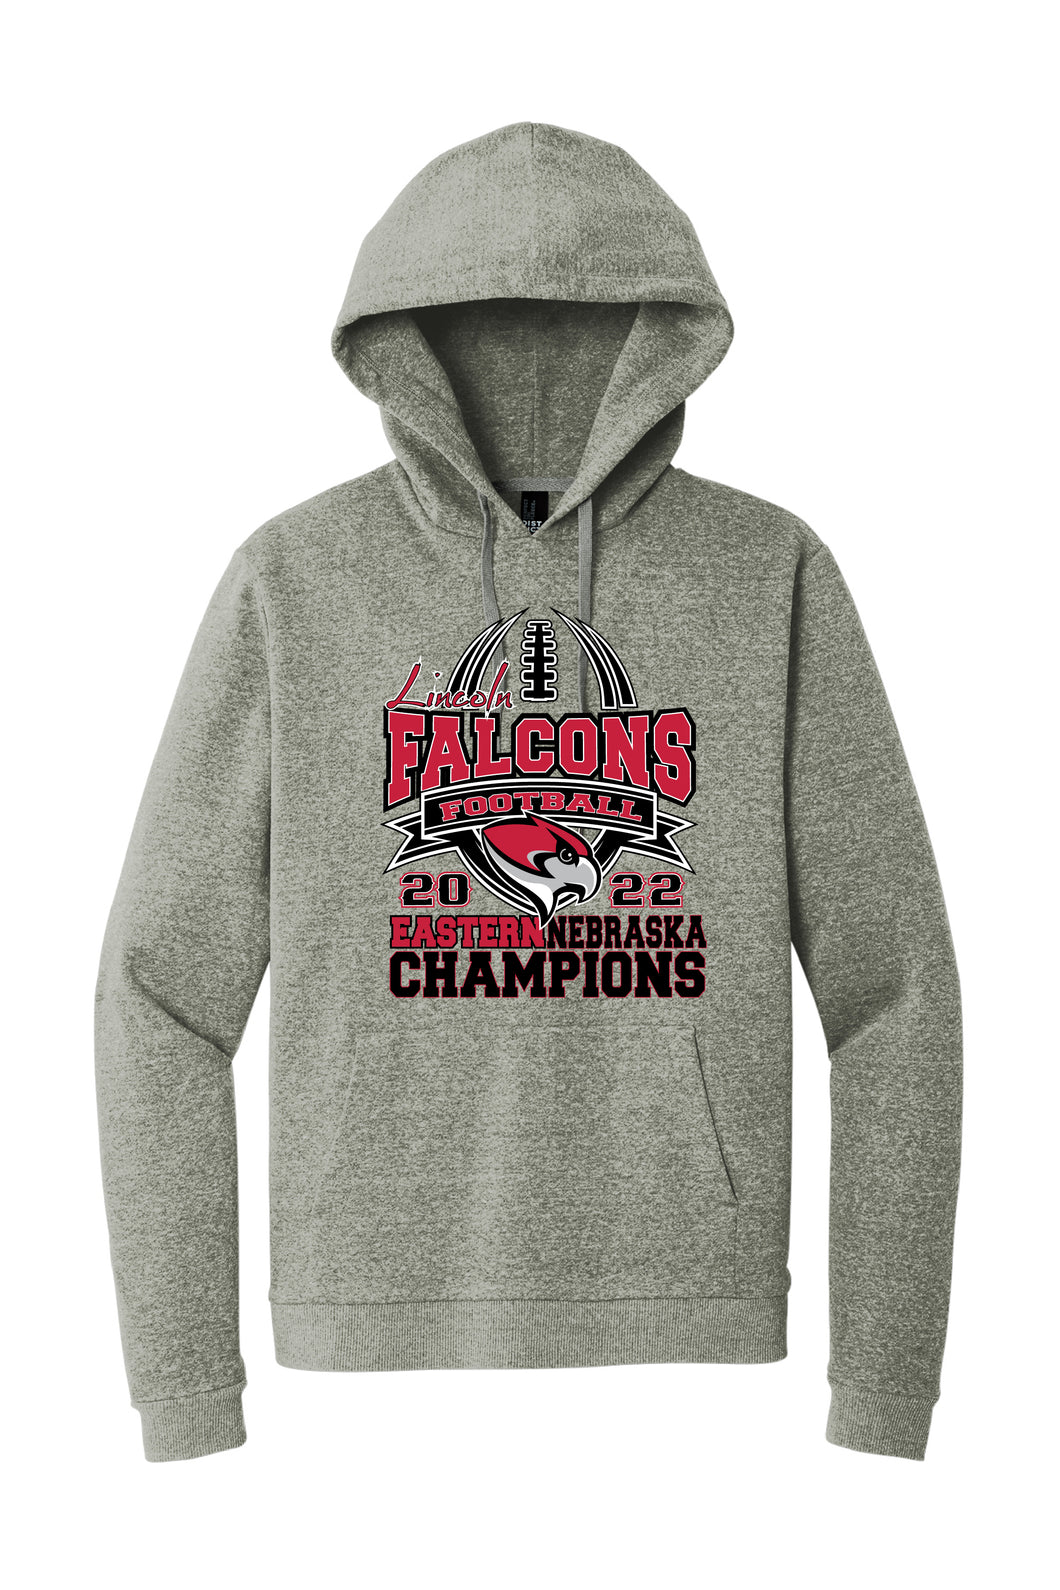 DT1300 Lincoln Falcon Champ Hoodie